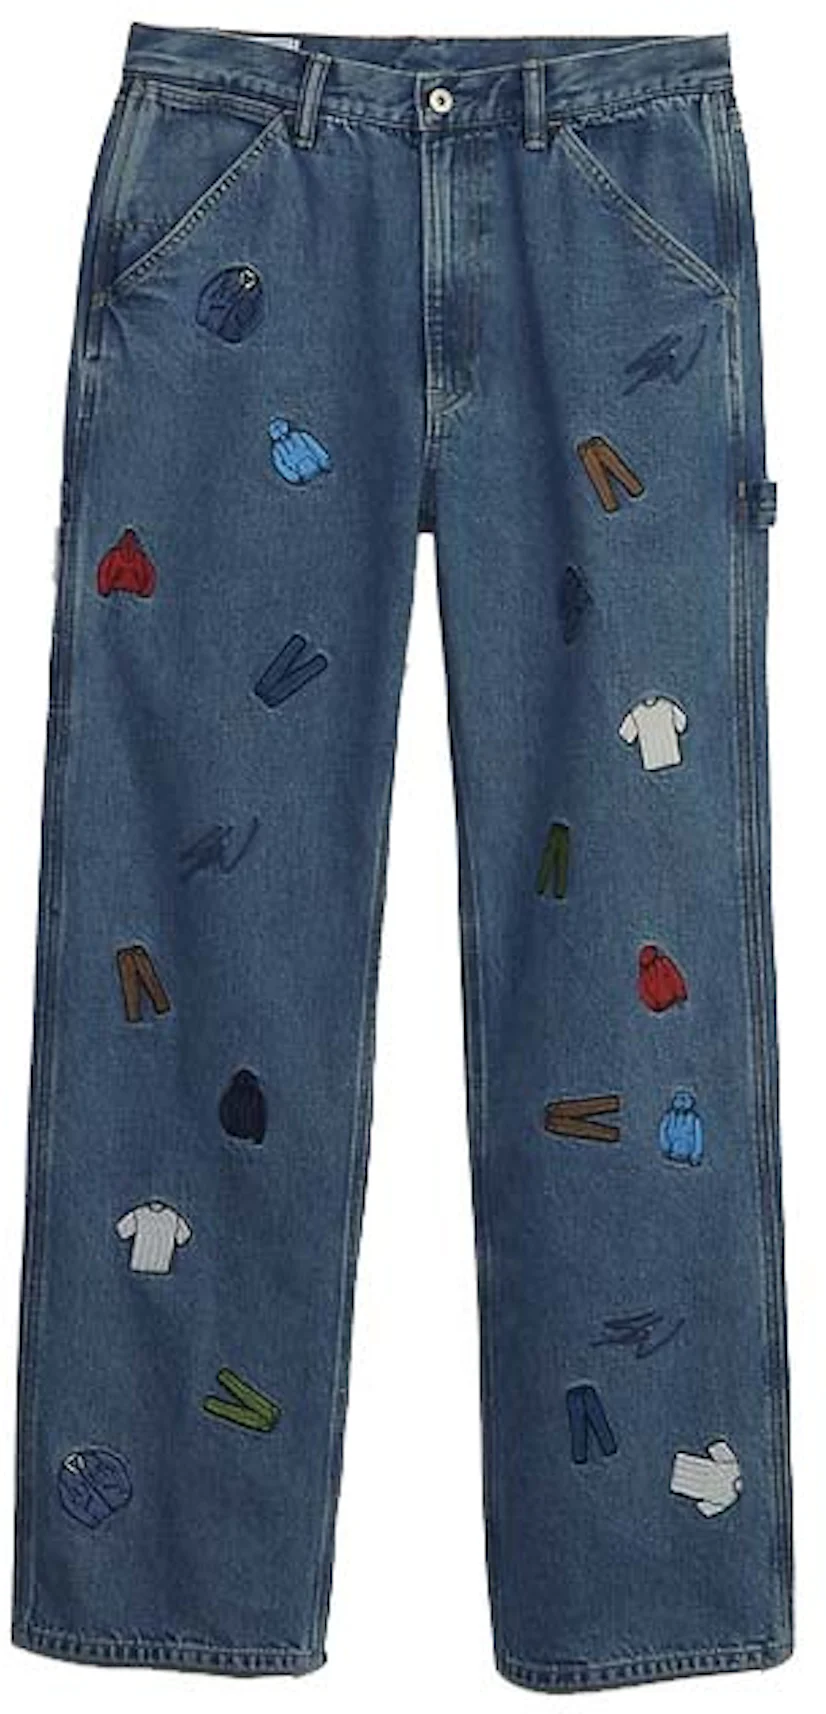 https://images.stockx.com/images/Gap-Re-Issue-x-Sean-Wotherspoon-Embroidered-Denim-Relaxed-Carpenter-Jeans-with-Washwell-Light-Denim.jpg?fit=fill&bg=FFFFFF&w=1200&h=857&fm=webp&auto=compress&dpr=2&trim=color&updated_at=1697560662&q=60